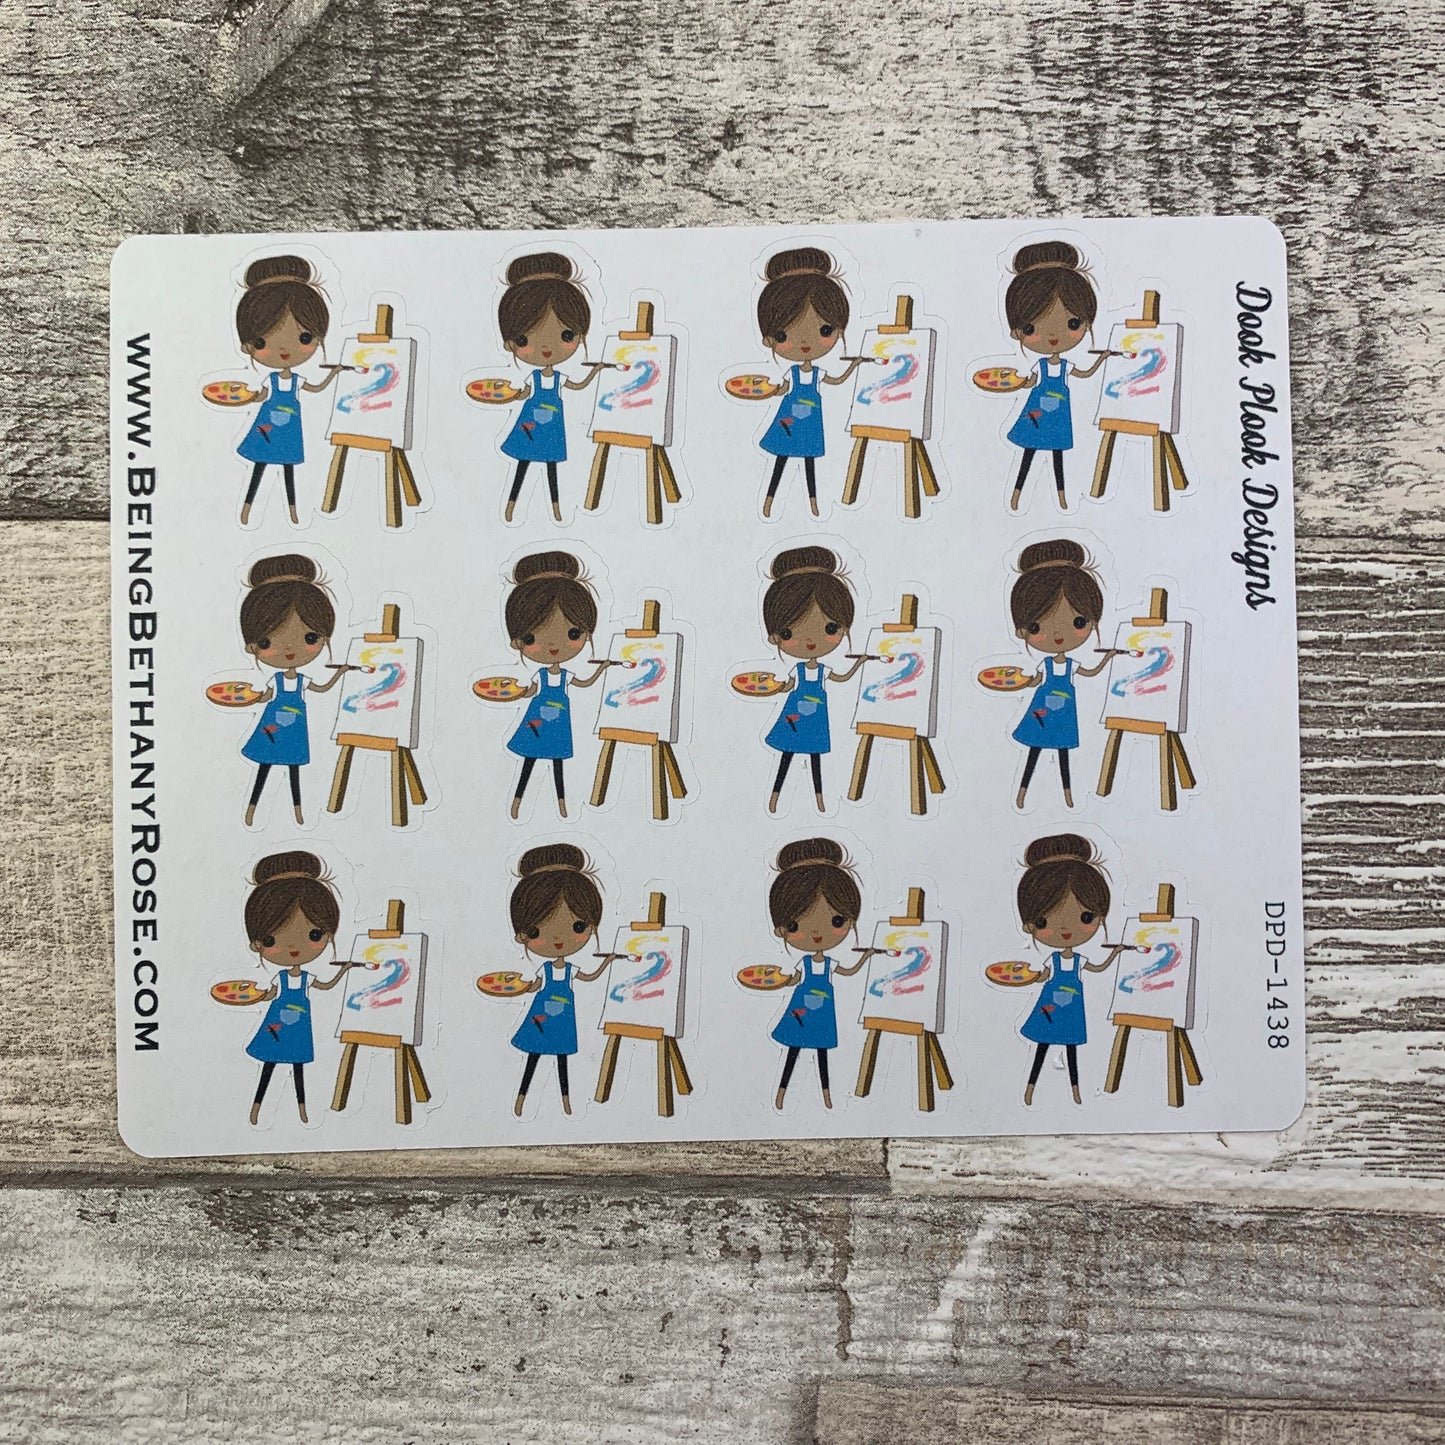 Black Woman - Art / Painting Stickers (DPD1438)